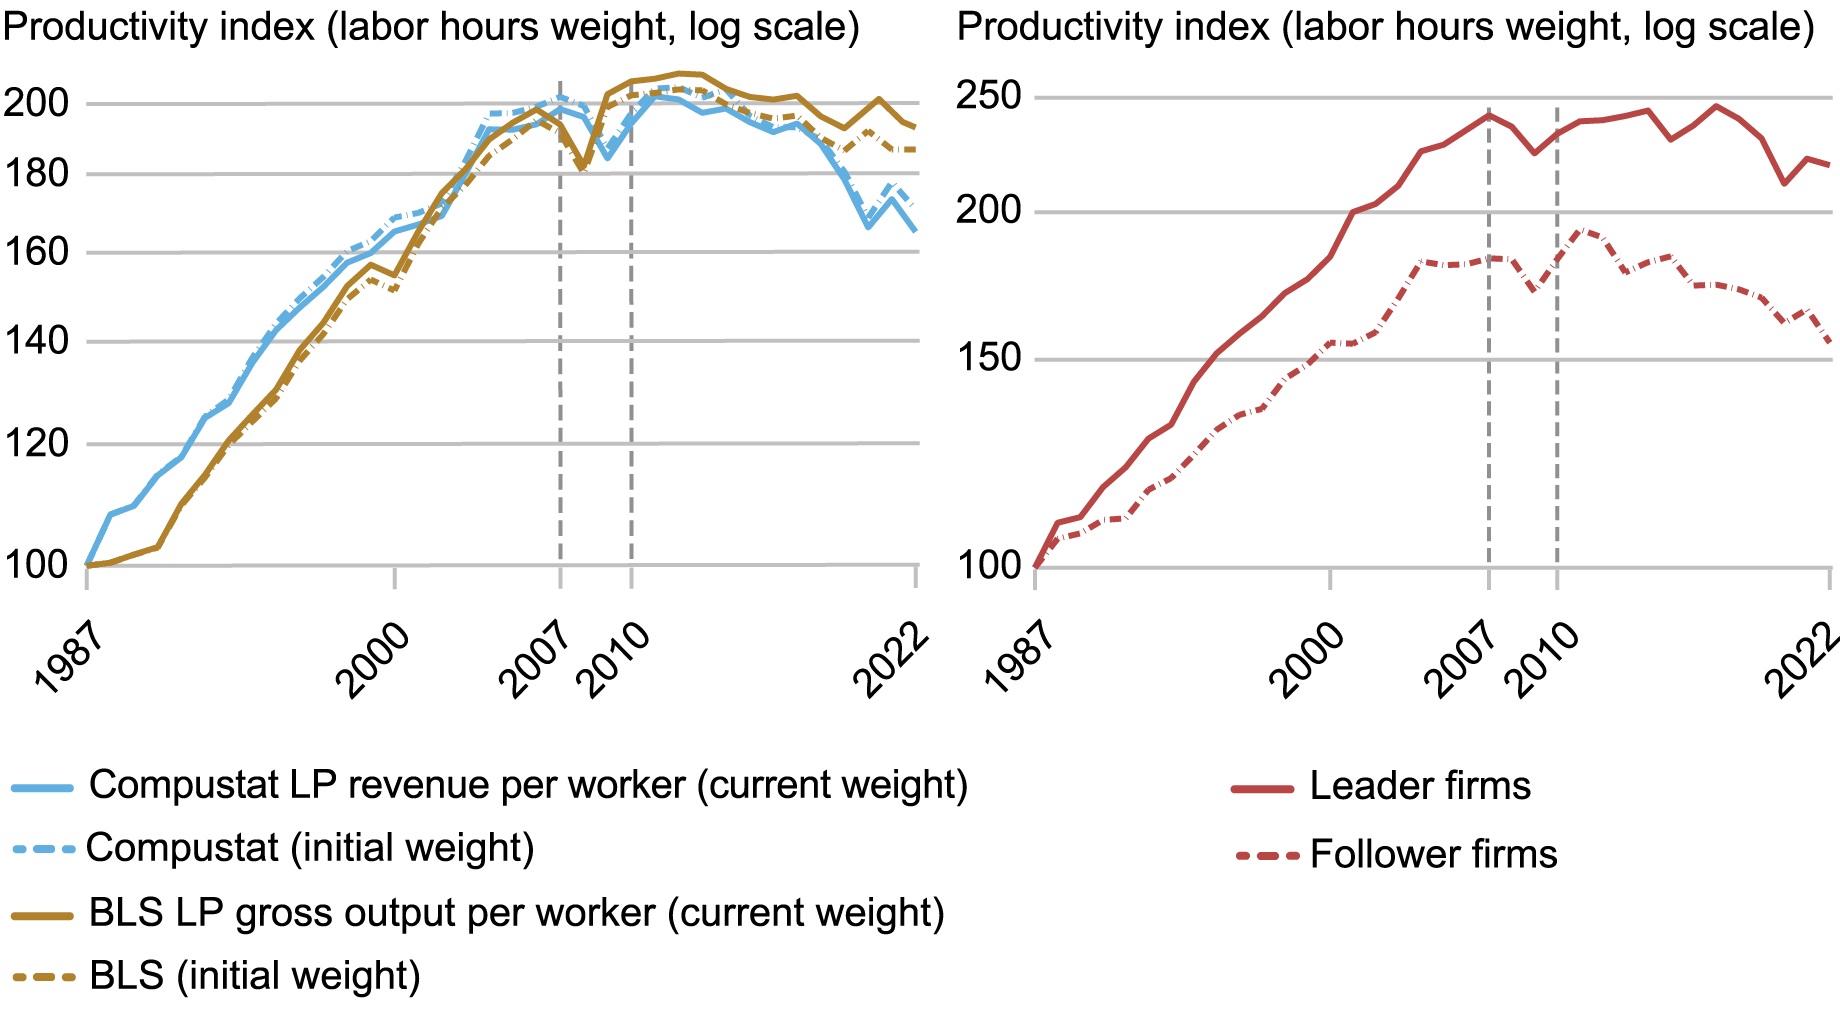 Panel charts tracking the labor productivity index from 1987 to 2022 for (left chart) Compustat LP revenue per worker (blue solid), Compustat initial rate using 1987 values (blue dotted), BLS LP gross output per worker (gold solid), BLS initial rate using 1987 values (gold dotted); and (right chart) fast-growing leader industries (red solid) and slow-growing follower industries (red dotted)